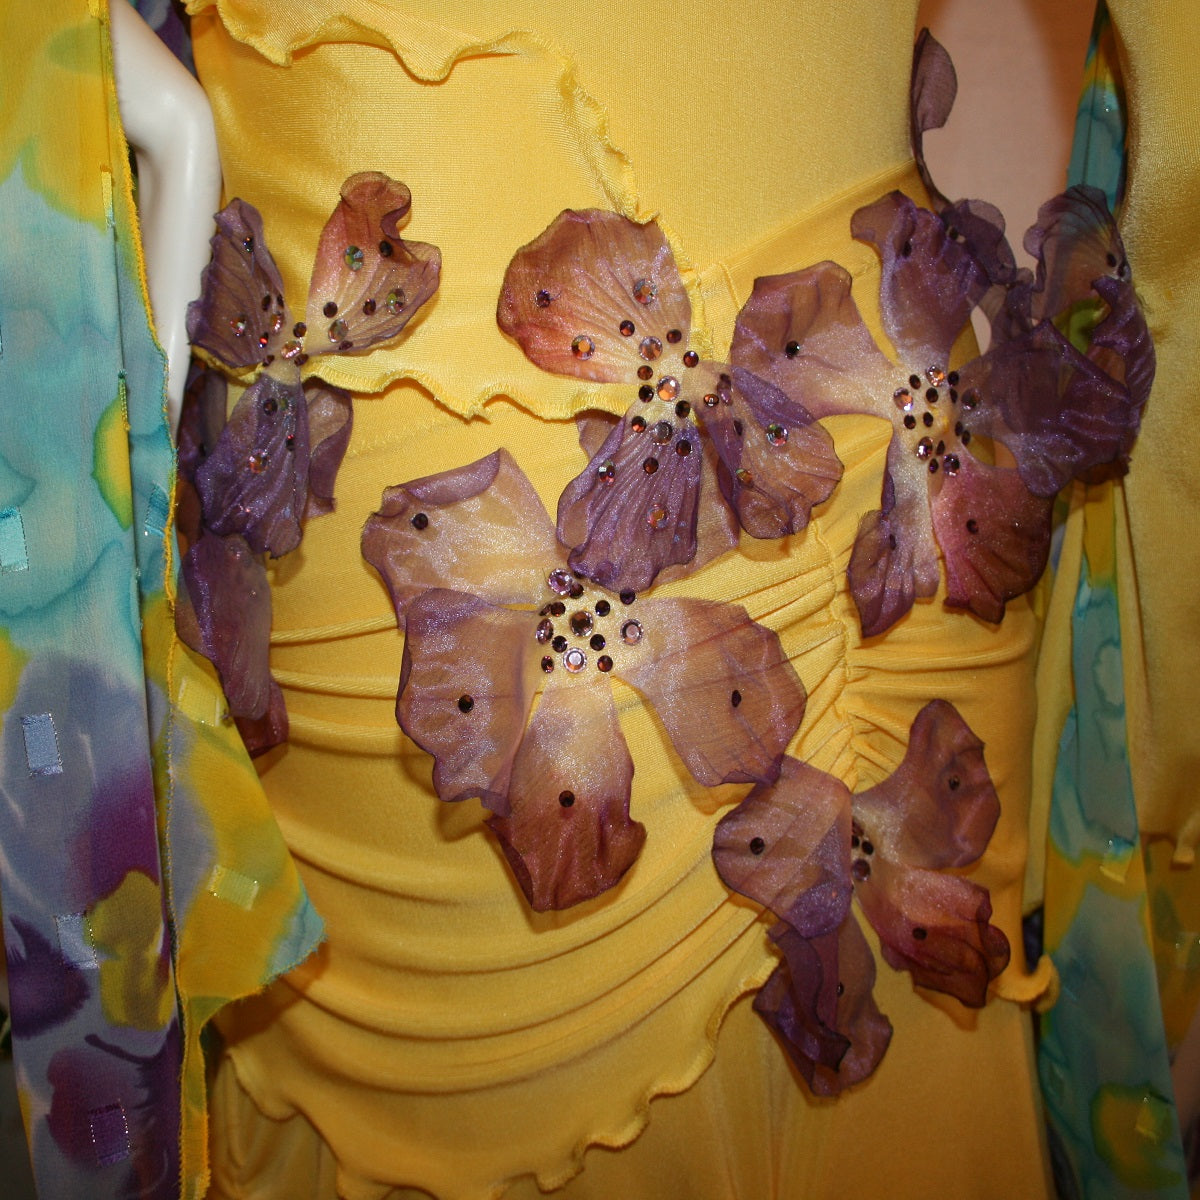 Crystal's Creations clos detail view of Yellow ballroom dress created of luxurious yellow slinky with yards of flower printed textured chiffon of yellow, orchids & blues is embellished with deep orchid silk flowers that have rhinestone work in shades of orchid.